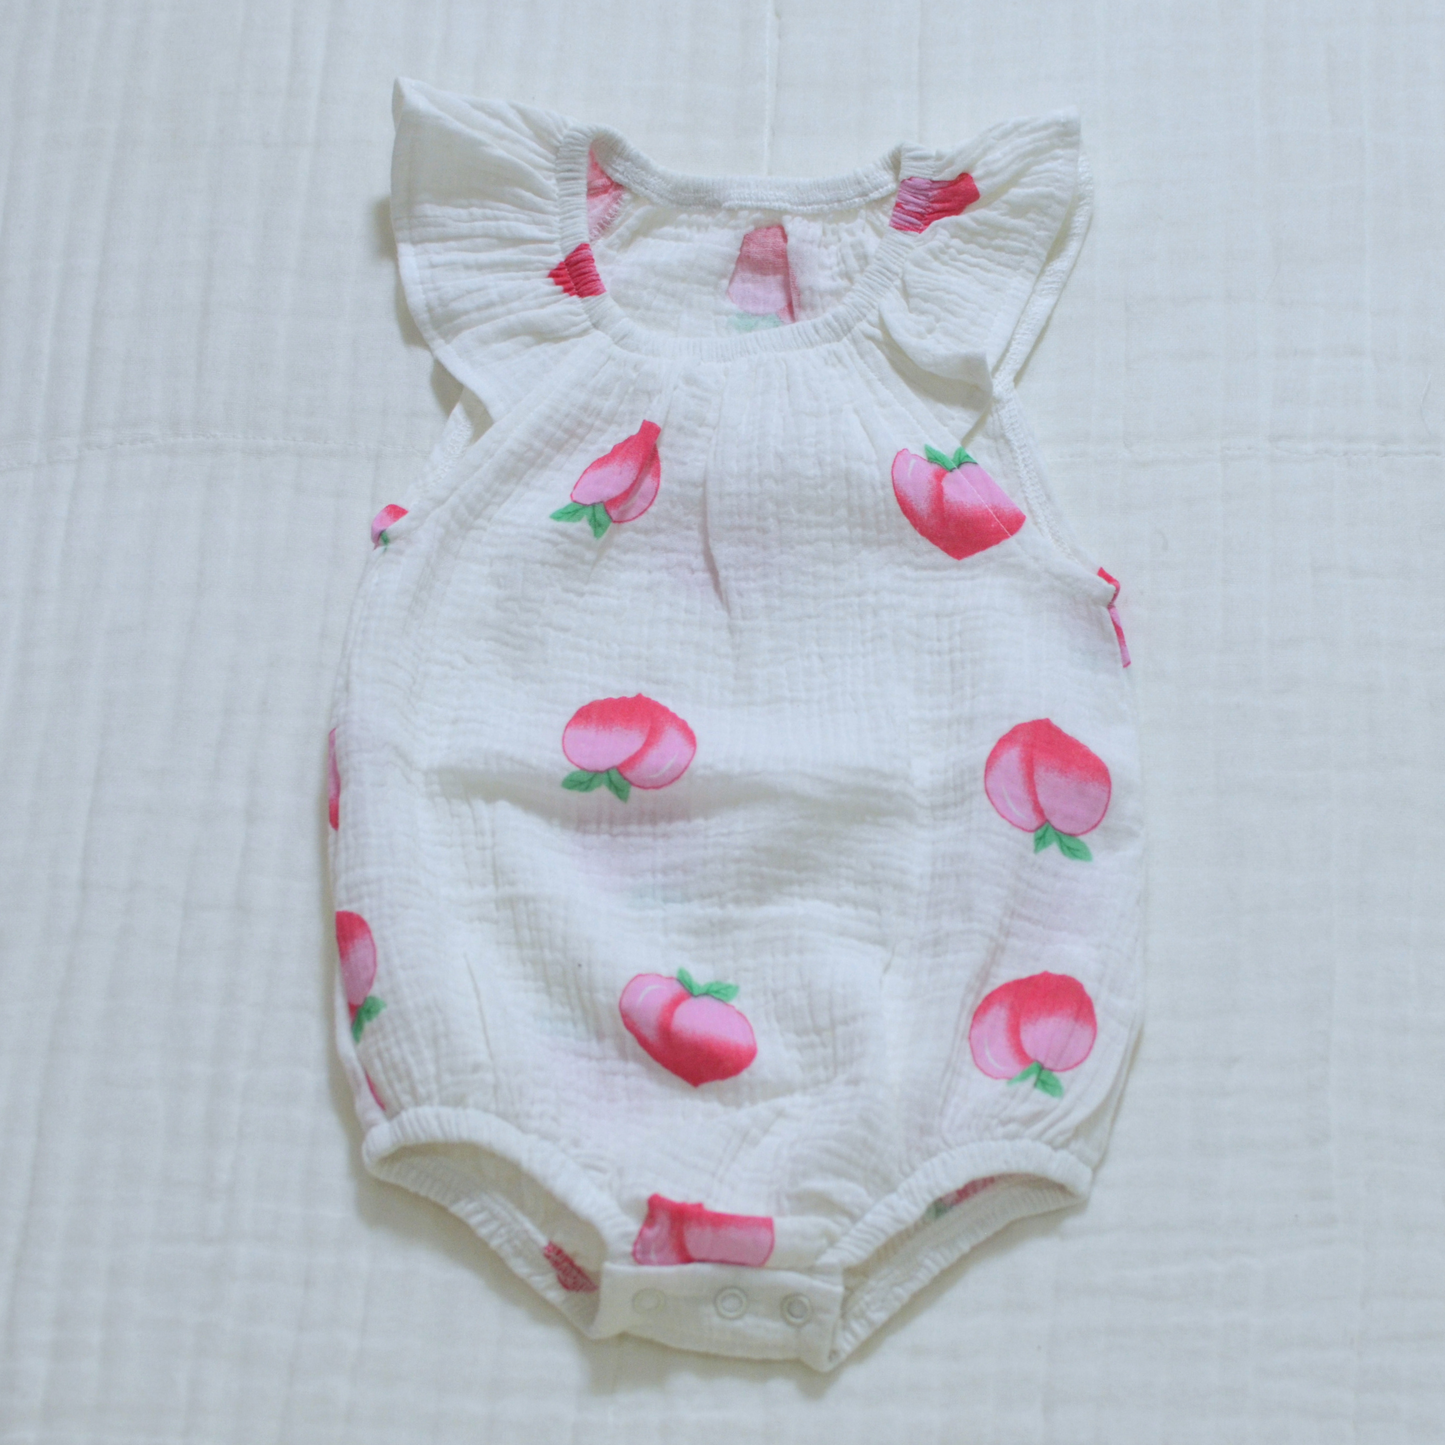 Muslin Ruffled Sleeve Baby Romper - 0 to 6 Month Size